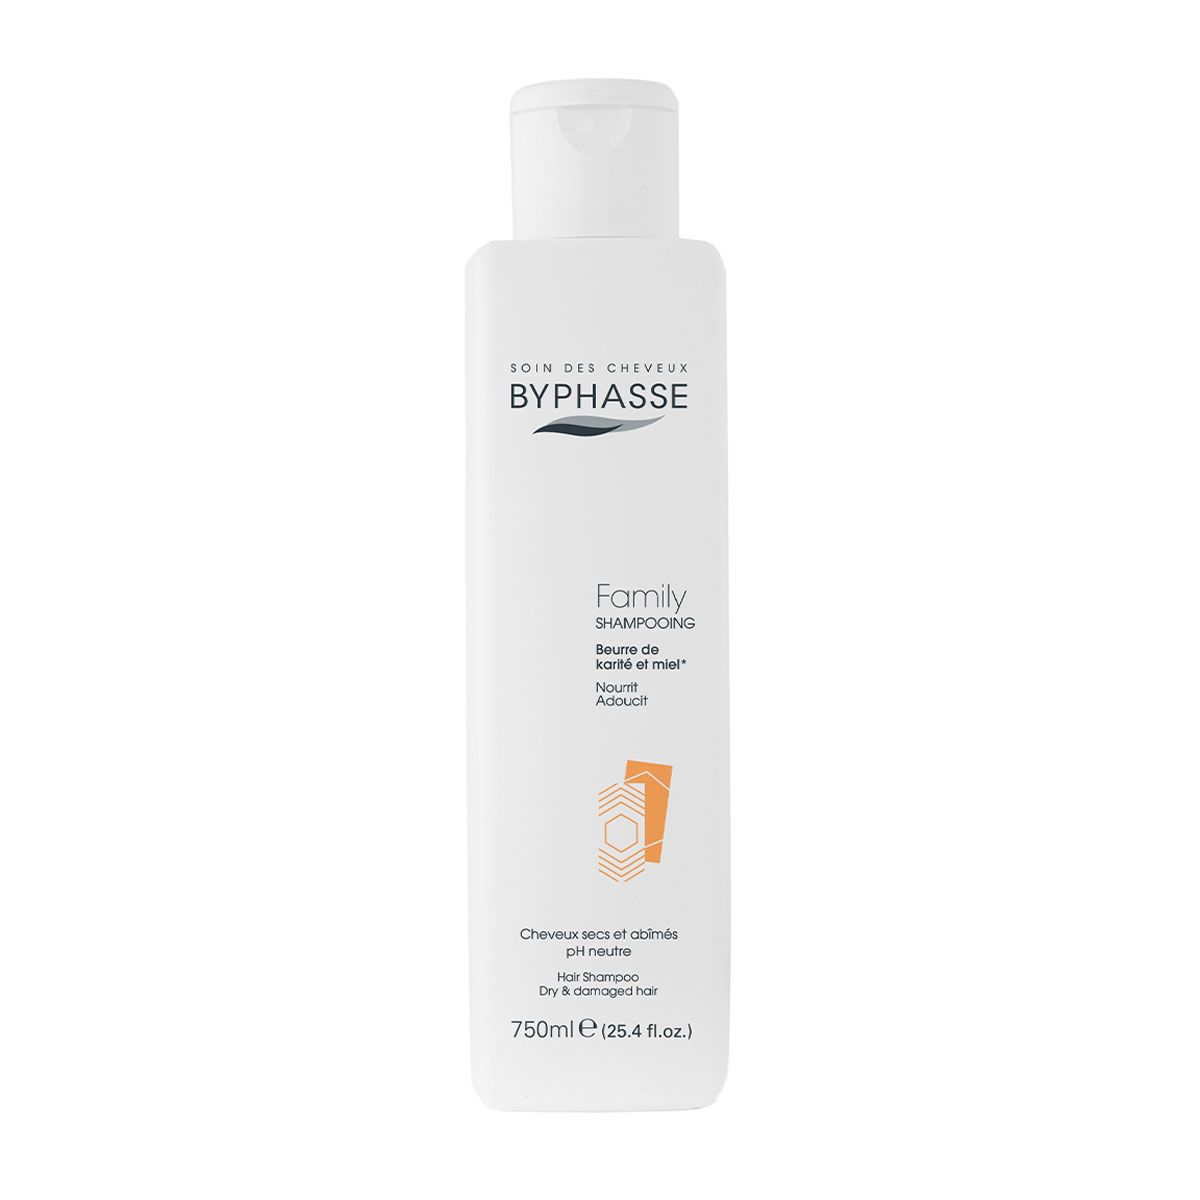 Byphasse Family shampoo shea butter and honey dry and damaged hair 750ml